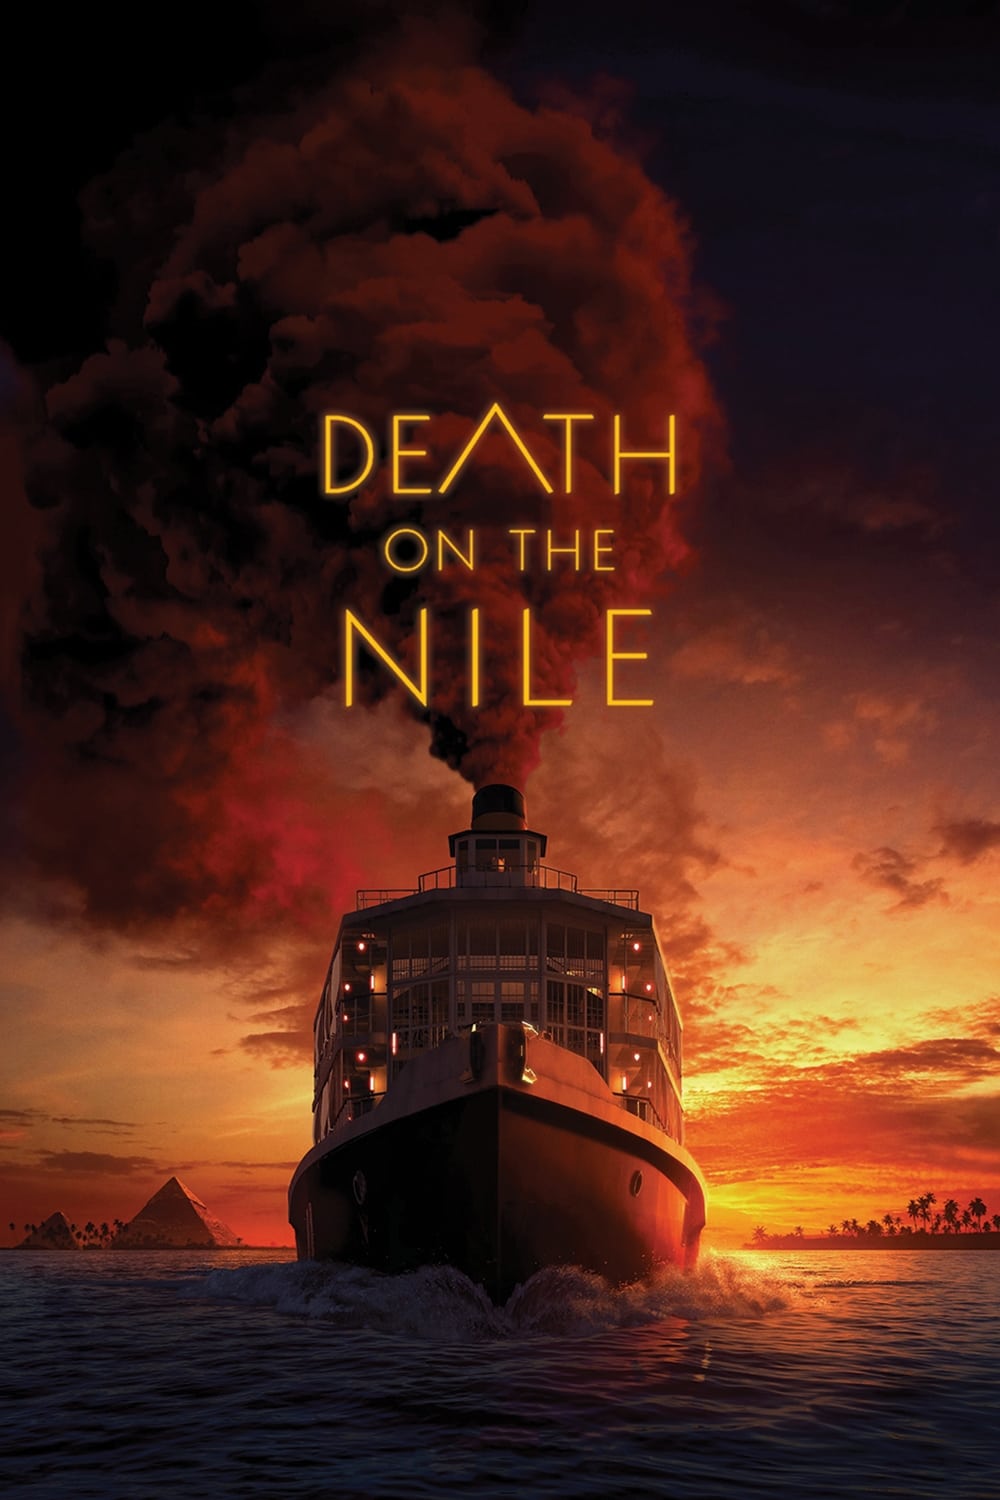 Poster for the movie "Death on the Nile"